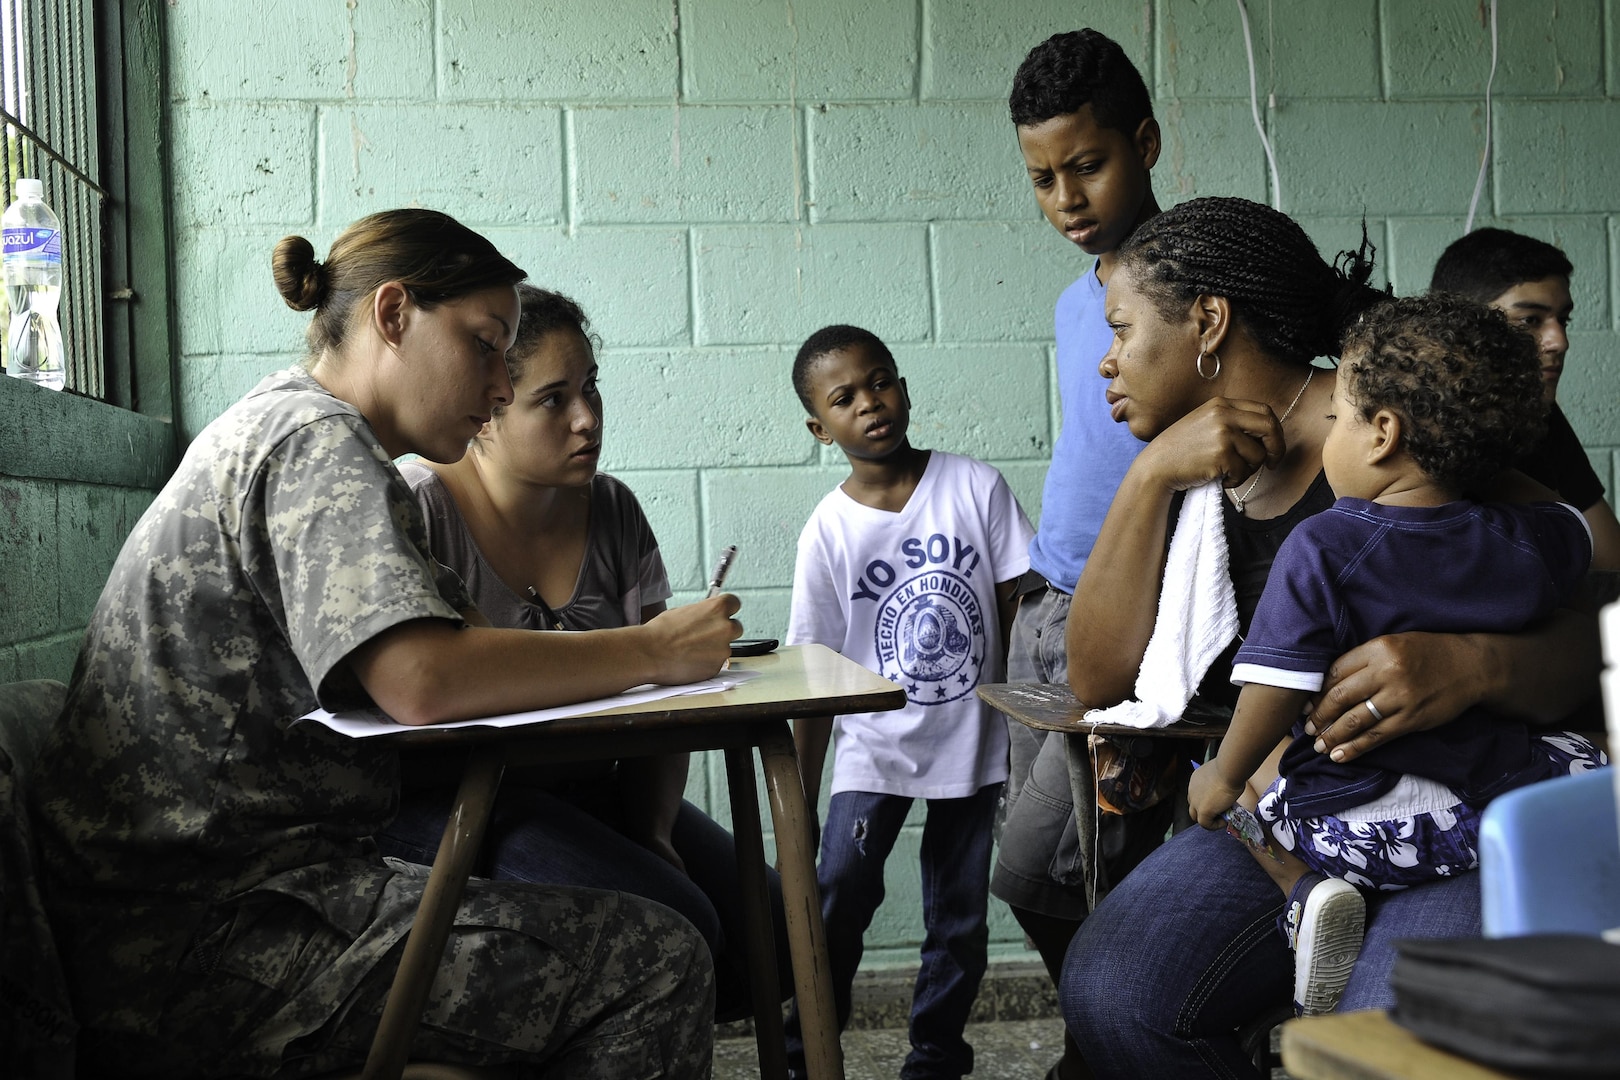 U.S. Army Spc. Lindsay Thompson, Joint Task Force-Bravo Medical Element medic, fills out paperwork during a Medical Readiness Training Exercise operation consultation in Trujillo, Honduras, July 29, 2016. U.S. military personnel from JTF-Bravo have been conducting MEDRETEs since 1993 and have treated more than 326,000 medical patients. (U.S. Air Force photo by Staff Sgt. Siuta B. Ika)